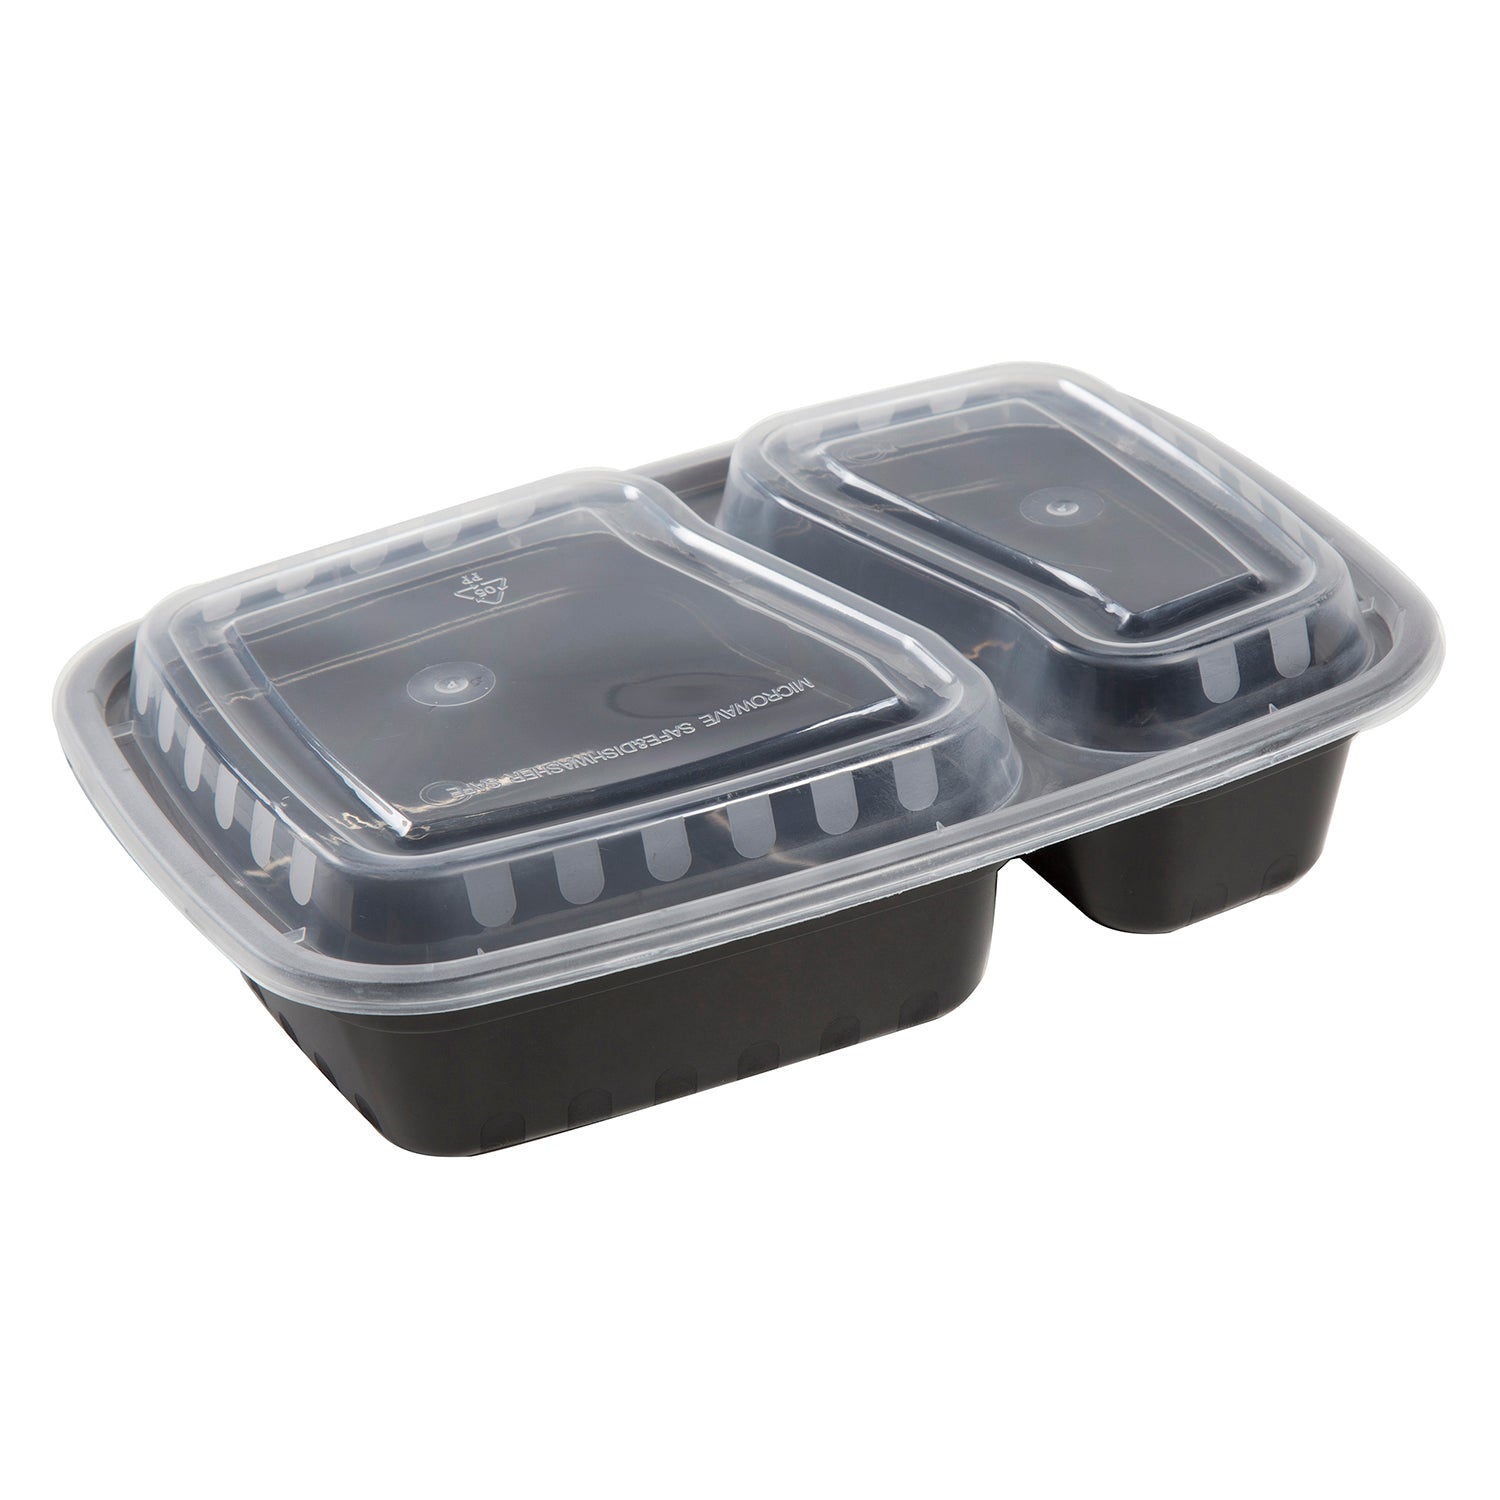 NEW SET OF 2 CLICK 3-1/4 CUP FOOD CONTAINERS & LIDS STORAGE NEW IN PKG